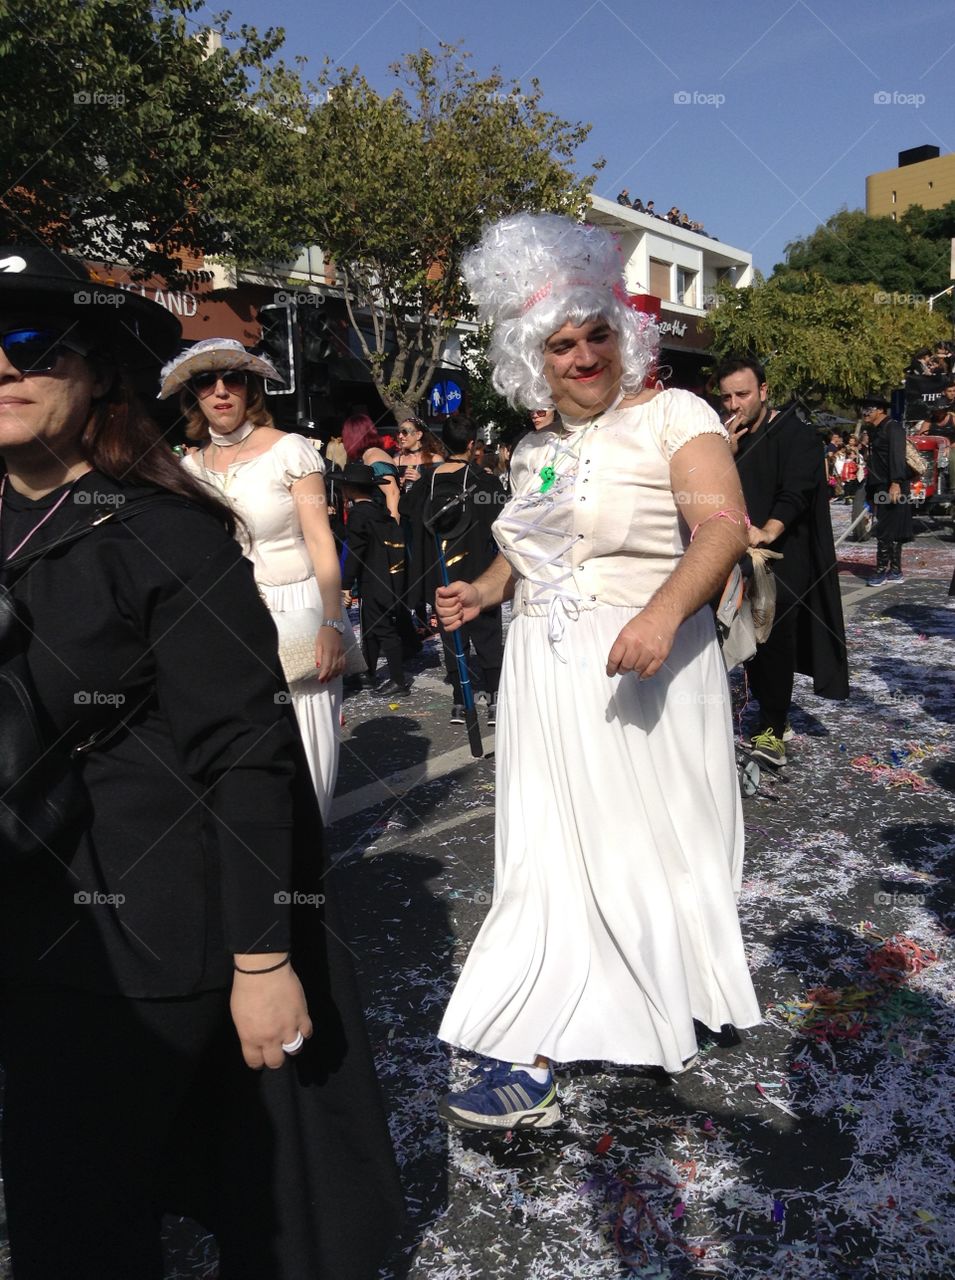 Man dressed as a woman in carnival parade.